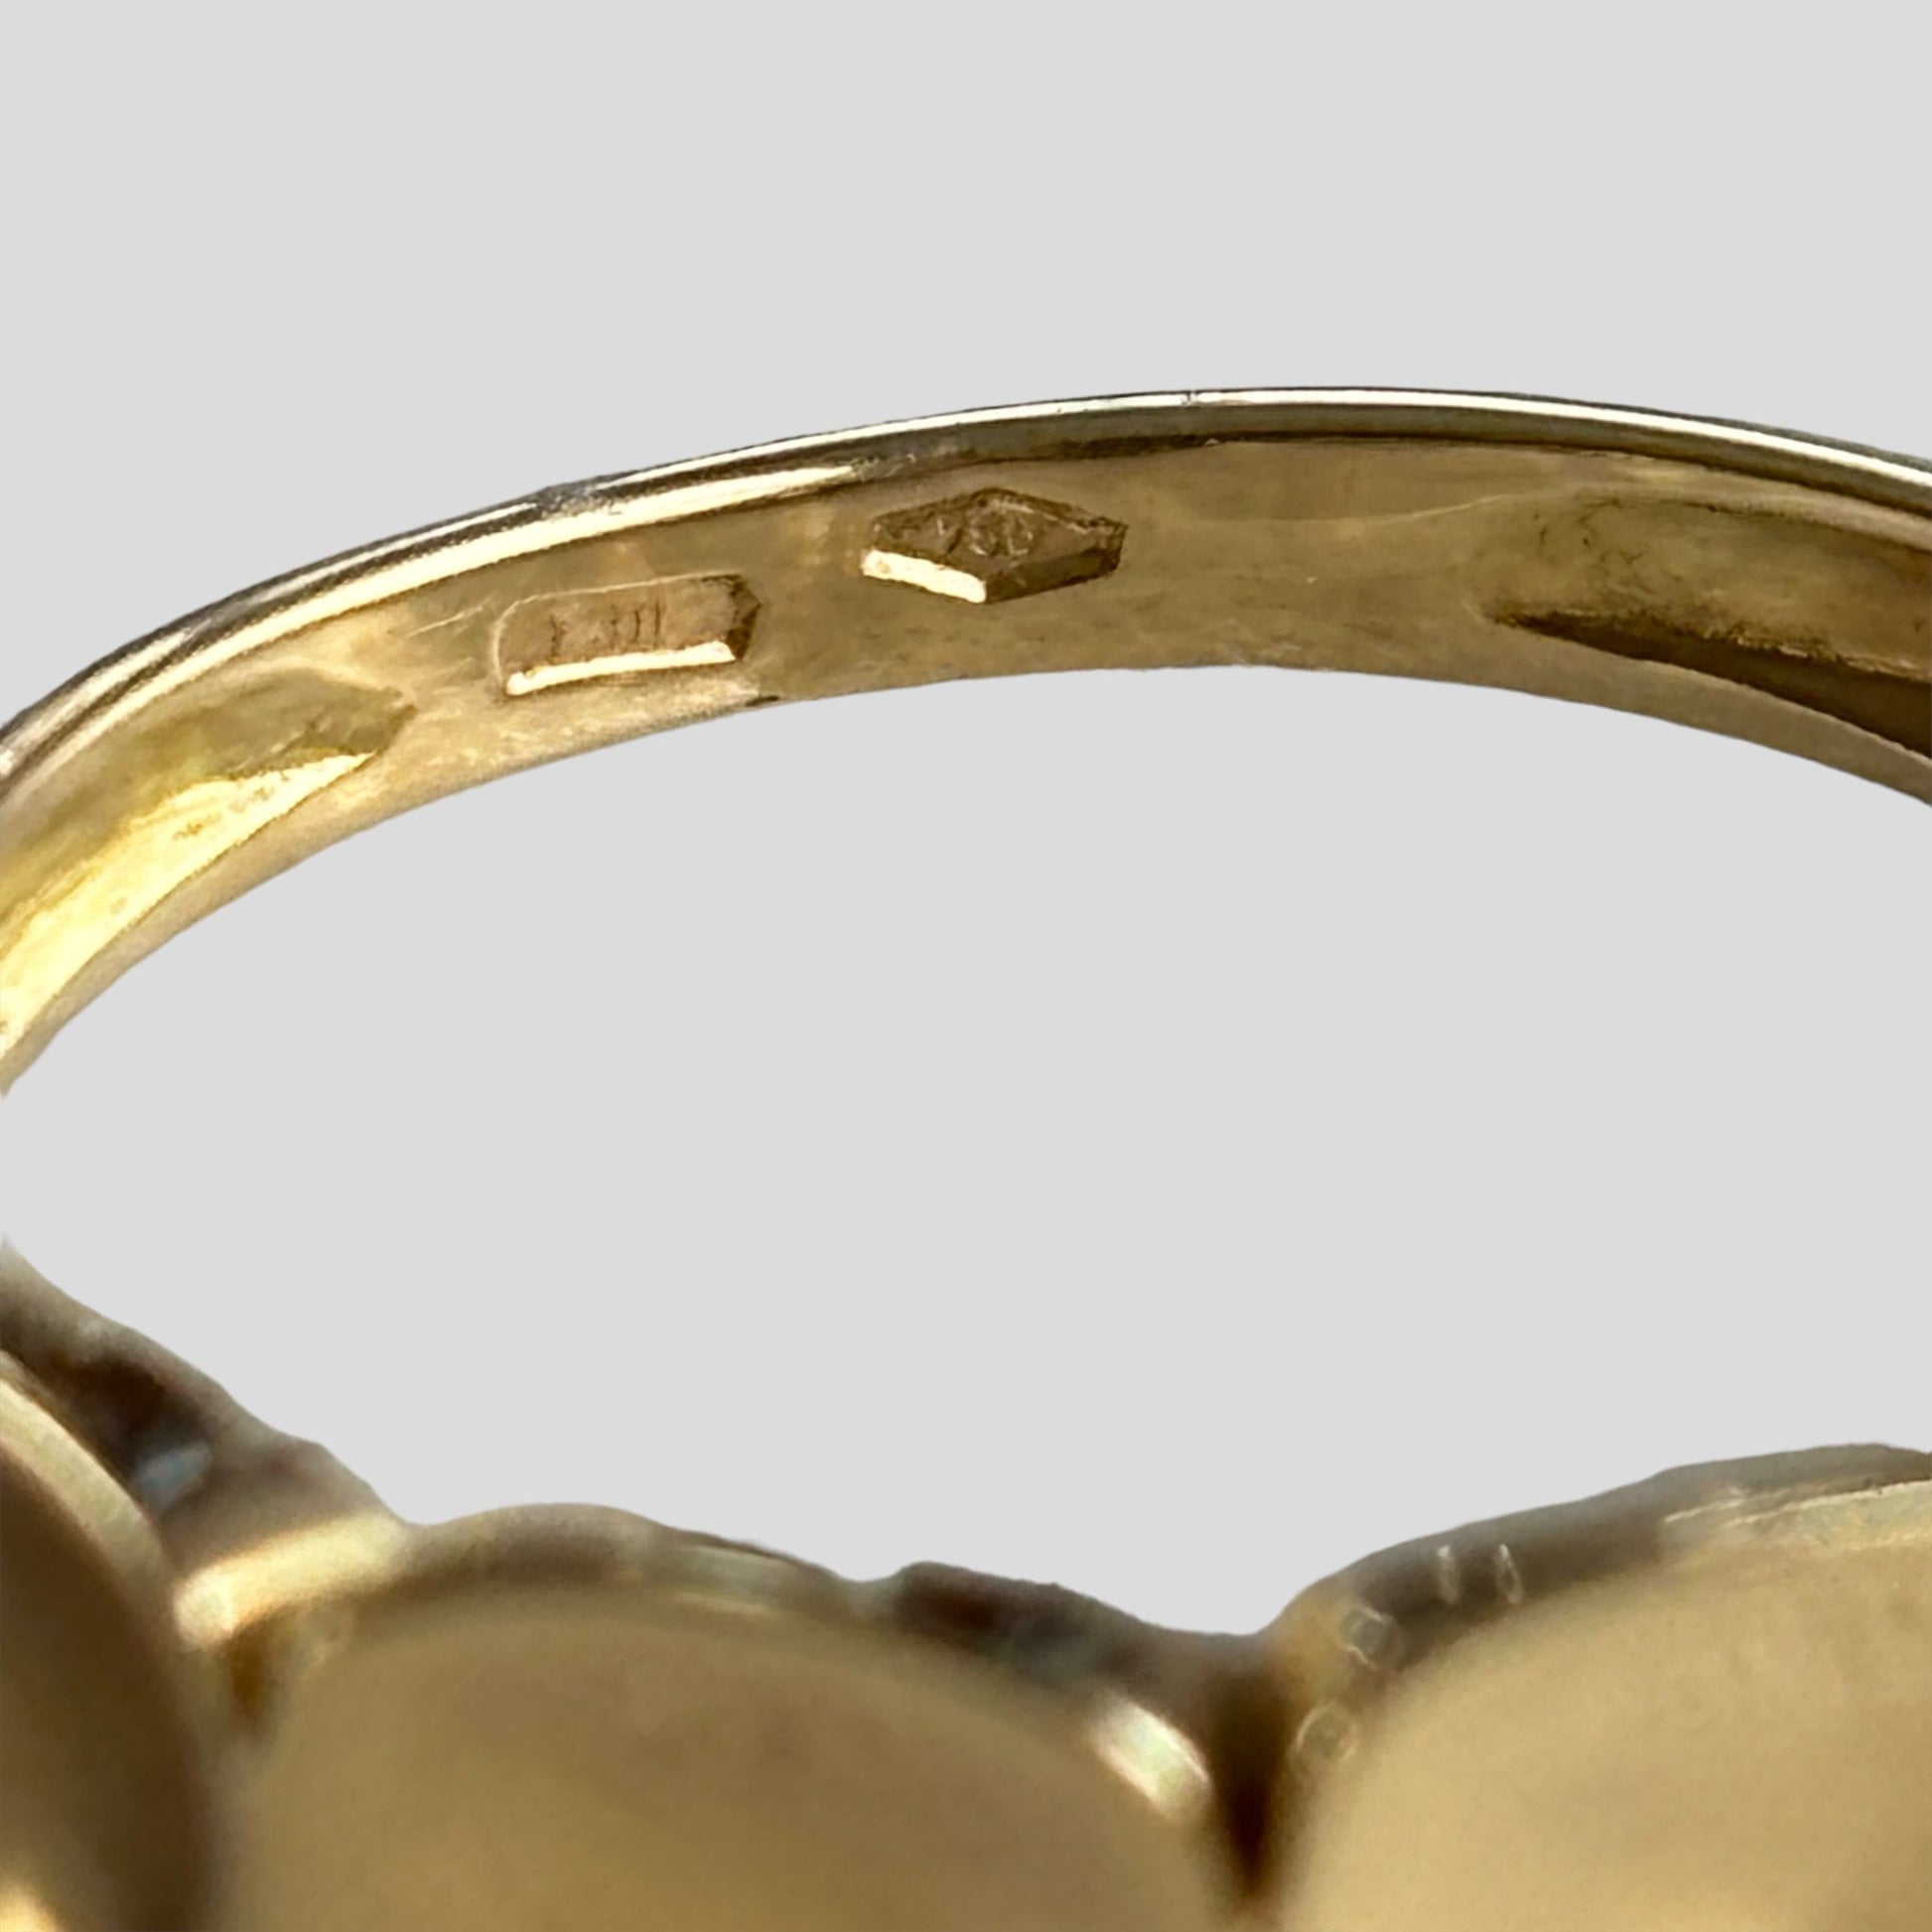 18k Incrementally Sized Rounded Edged Squares Gold Ring Close up showing 750 18k pure gold stamp